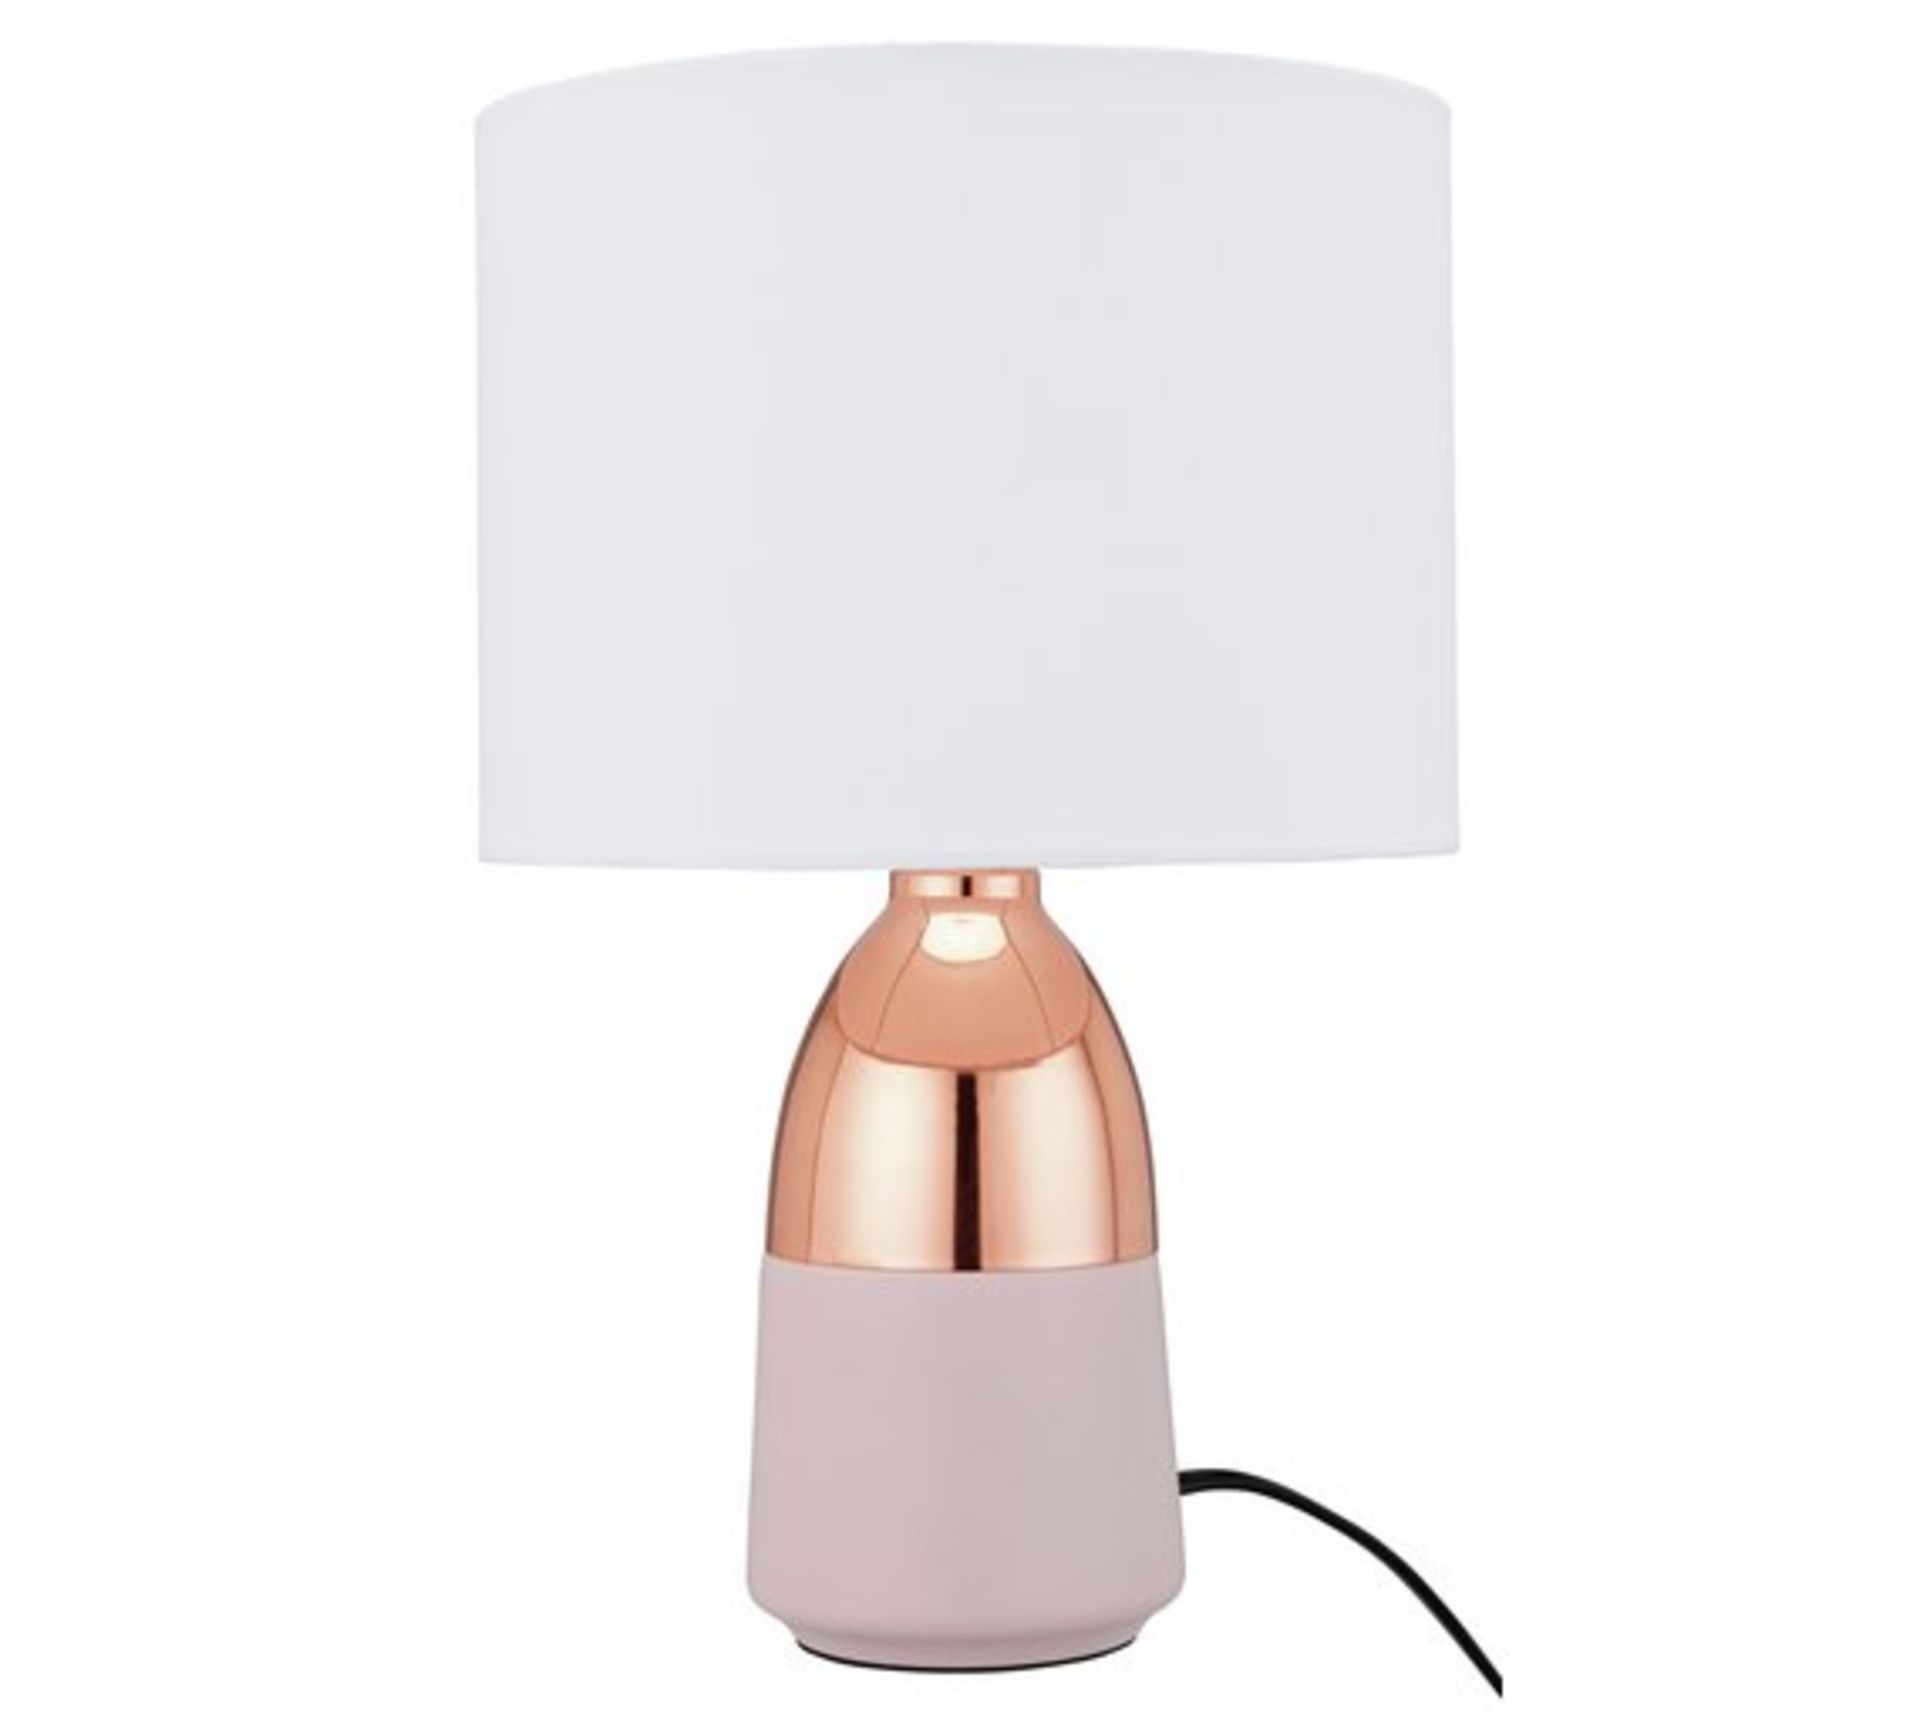 1 BOXED CHECKED AND REFURBISHED ARGOS DUNO TOUCH LAMP IN PINK AND COPPER (NO VAT)